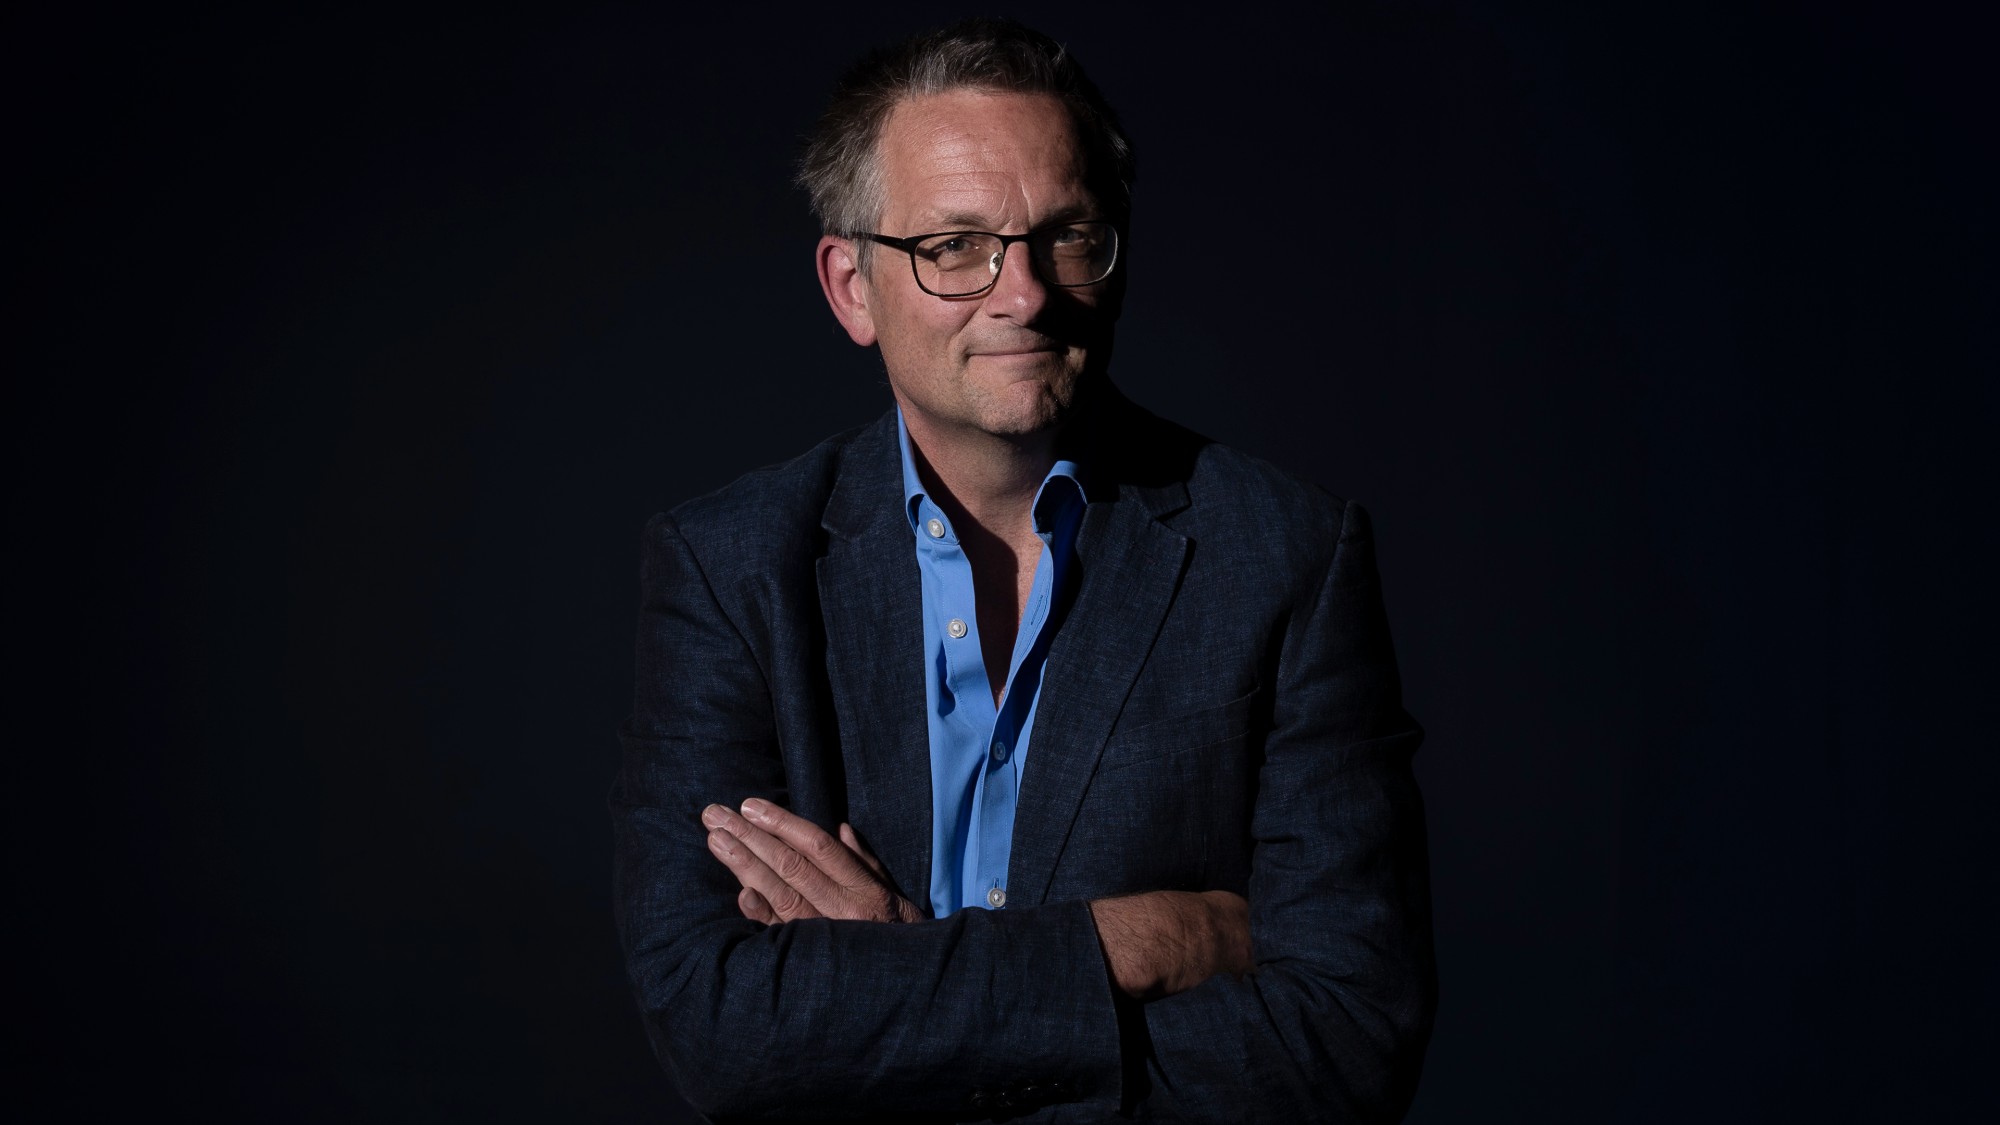  Michael Mosley obituary: television doctor whose work changed thousands of lives 